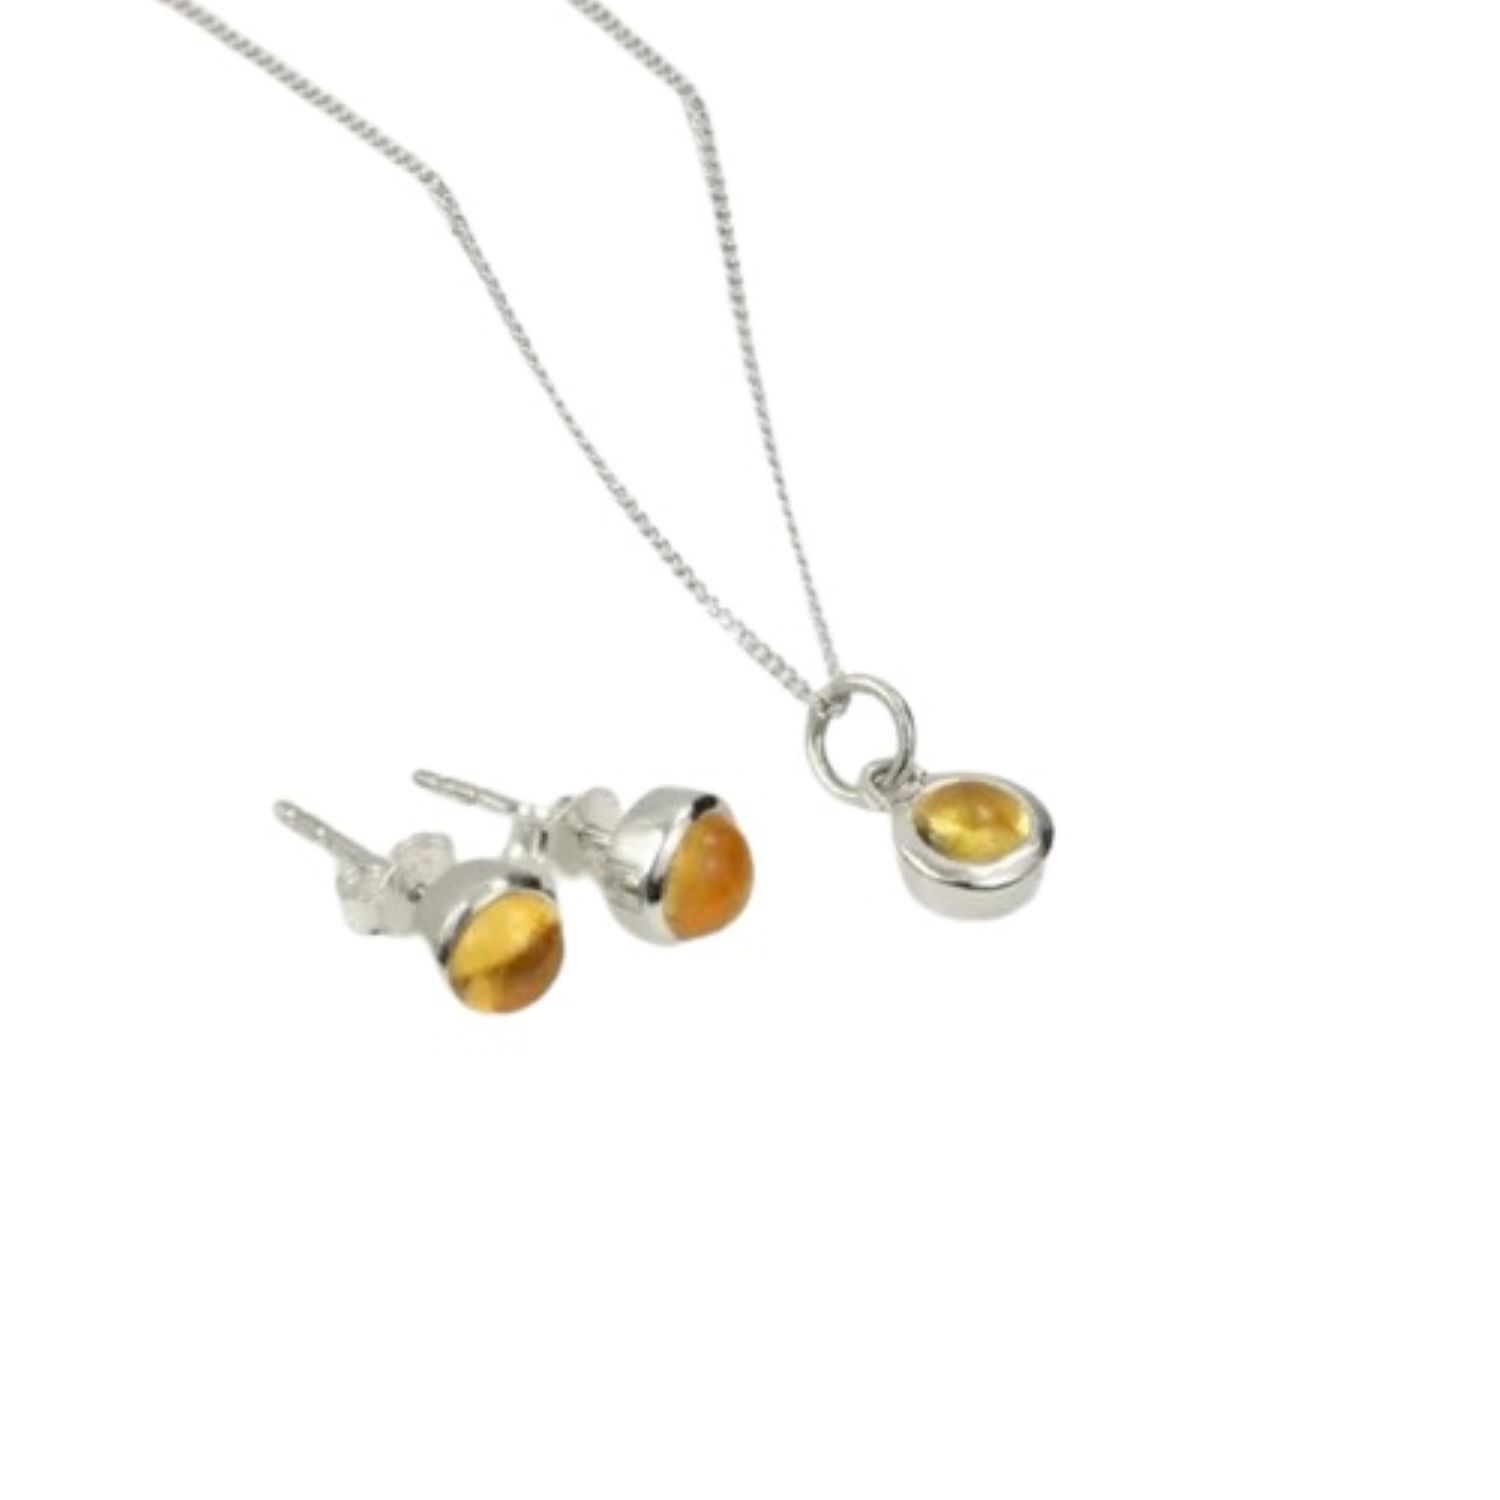 Women’s Silver / Yellow / Orange November Birthstone Jewellery Set In Sterling Silver- Citrine Studs & Charm Necklace The Jewellery Store London